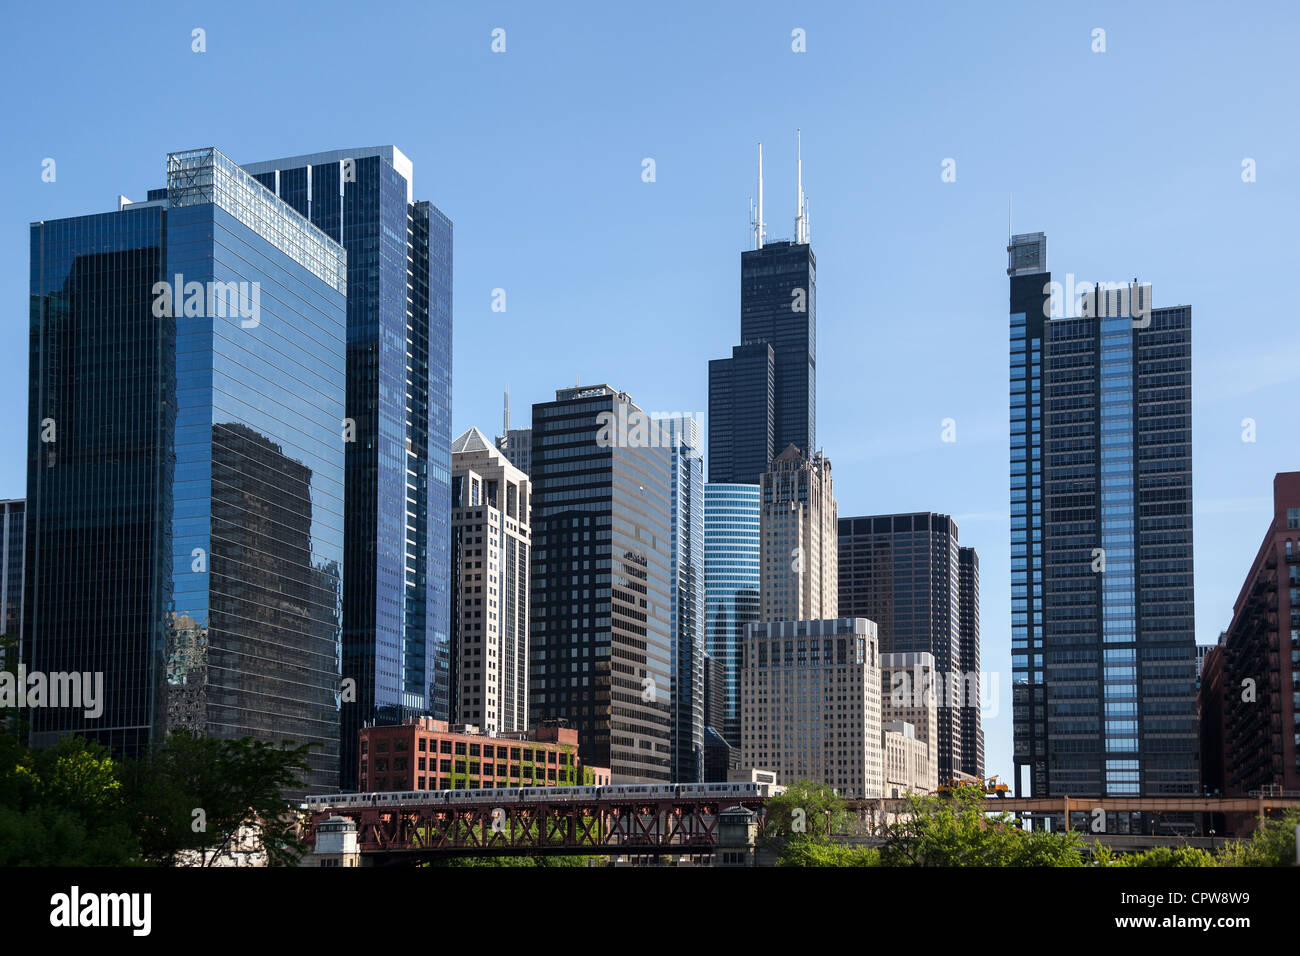 Chigaco city with the Willis tower in distance, Chicago, IL, USA Stock Photo